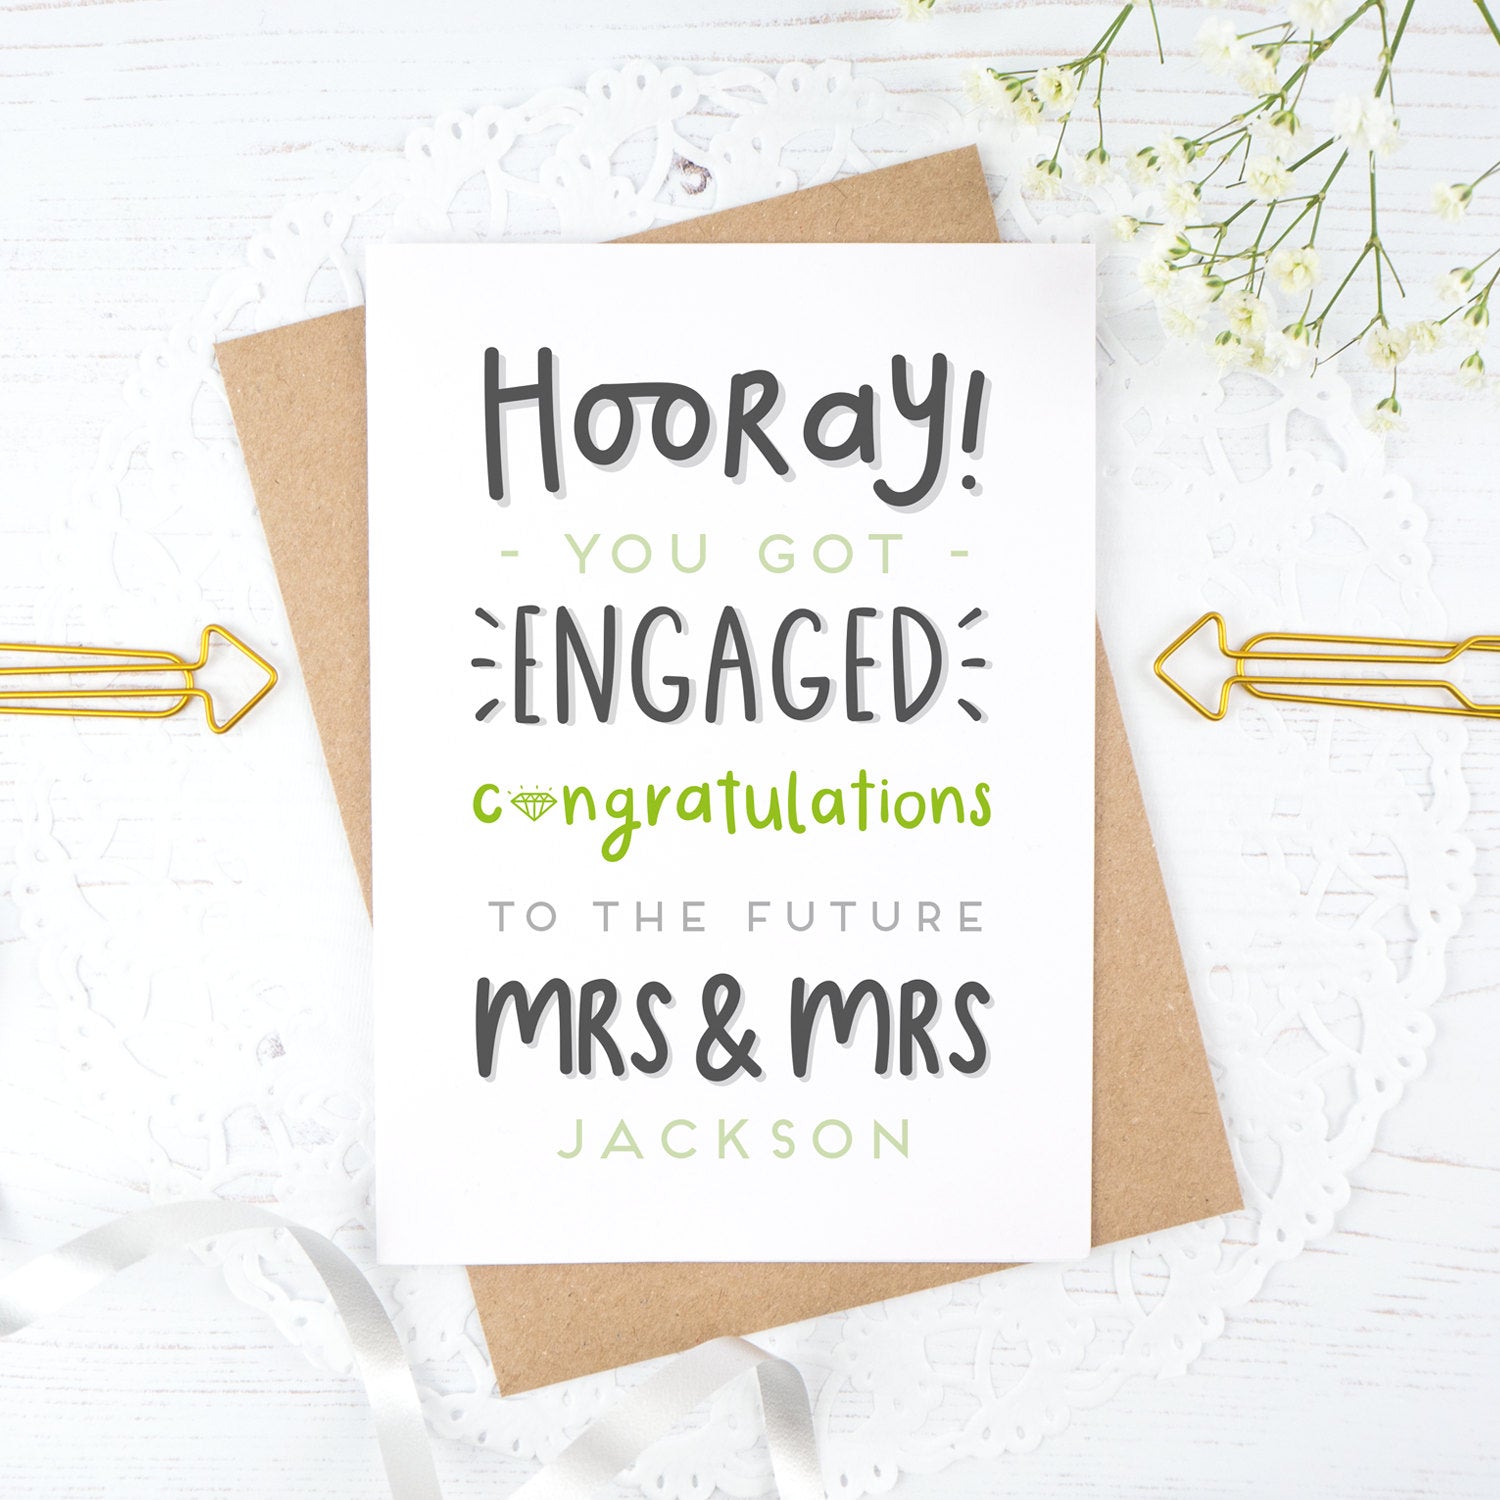 Hooray you got engaged! - Personalised Mrs & Mrs engagement card in green